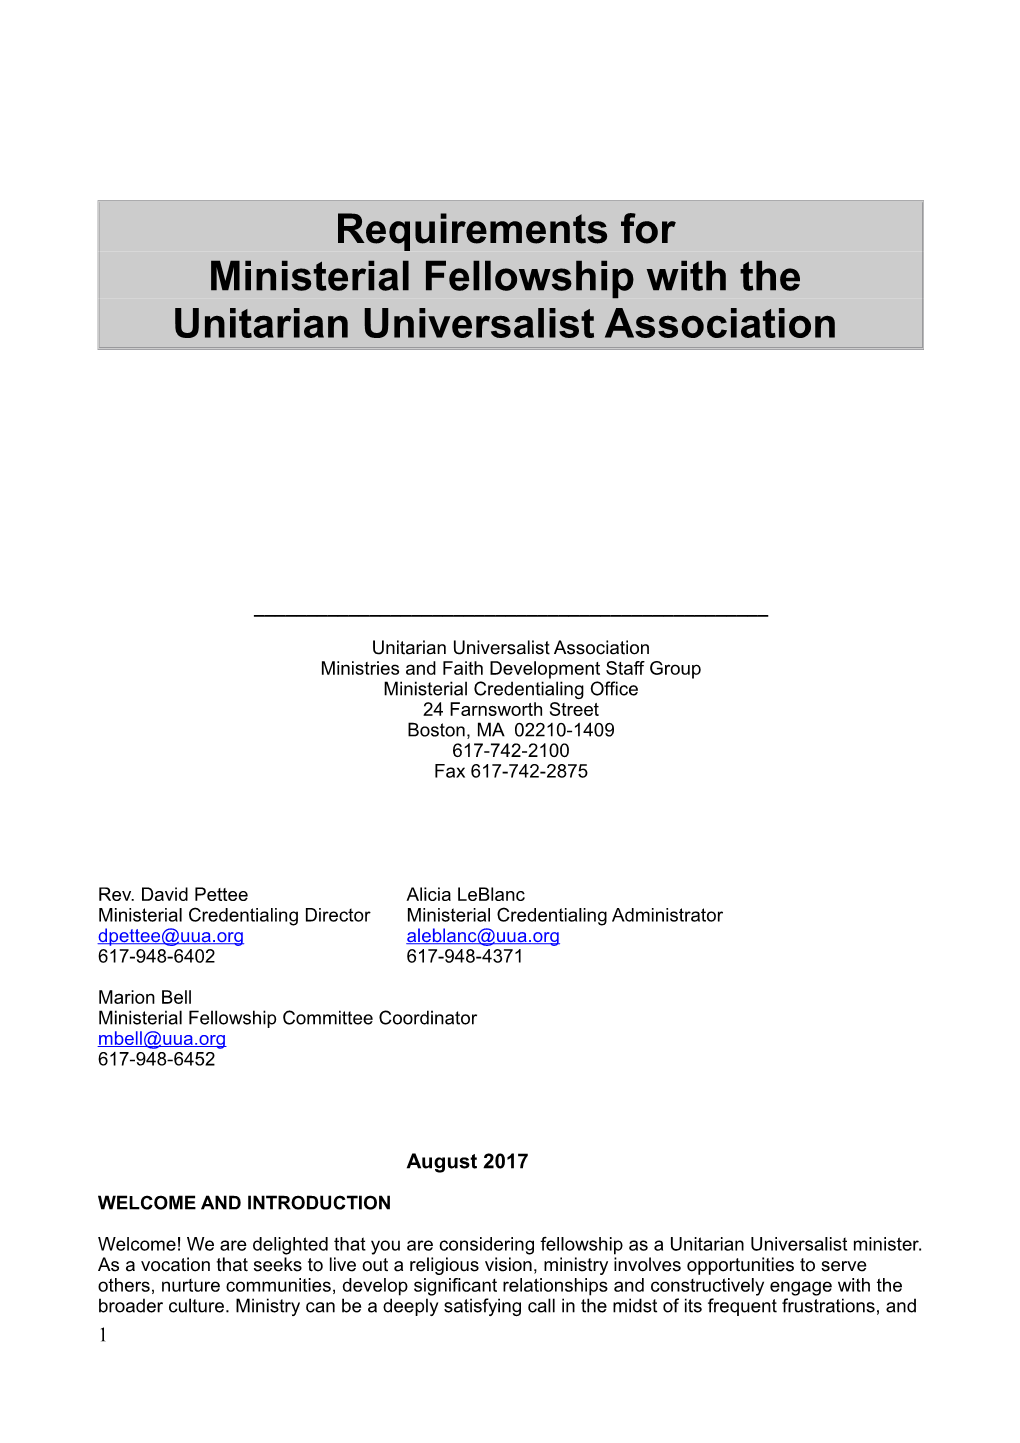 Requirements for Ministerial Fellowship